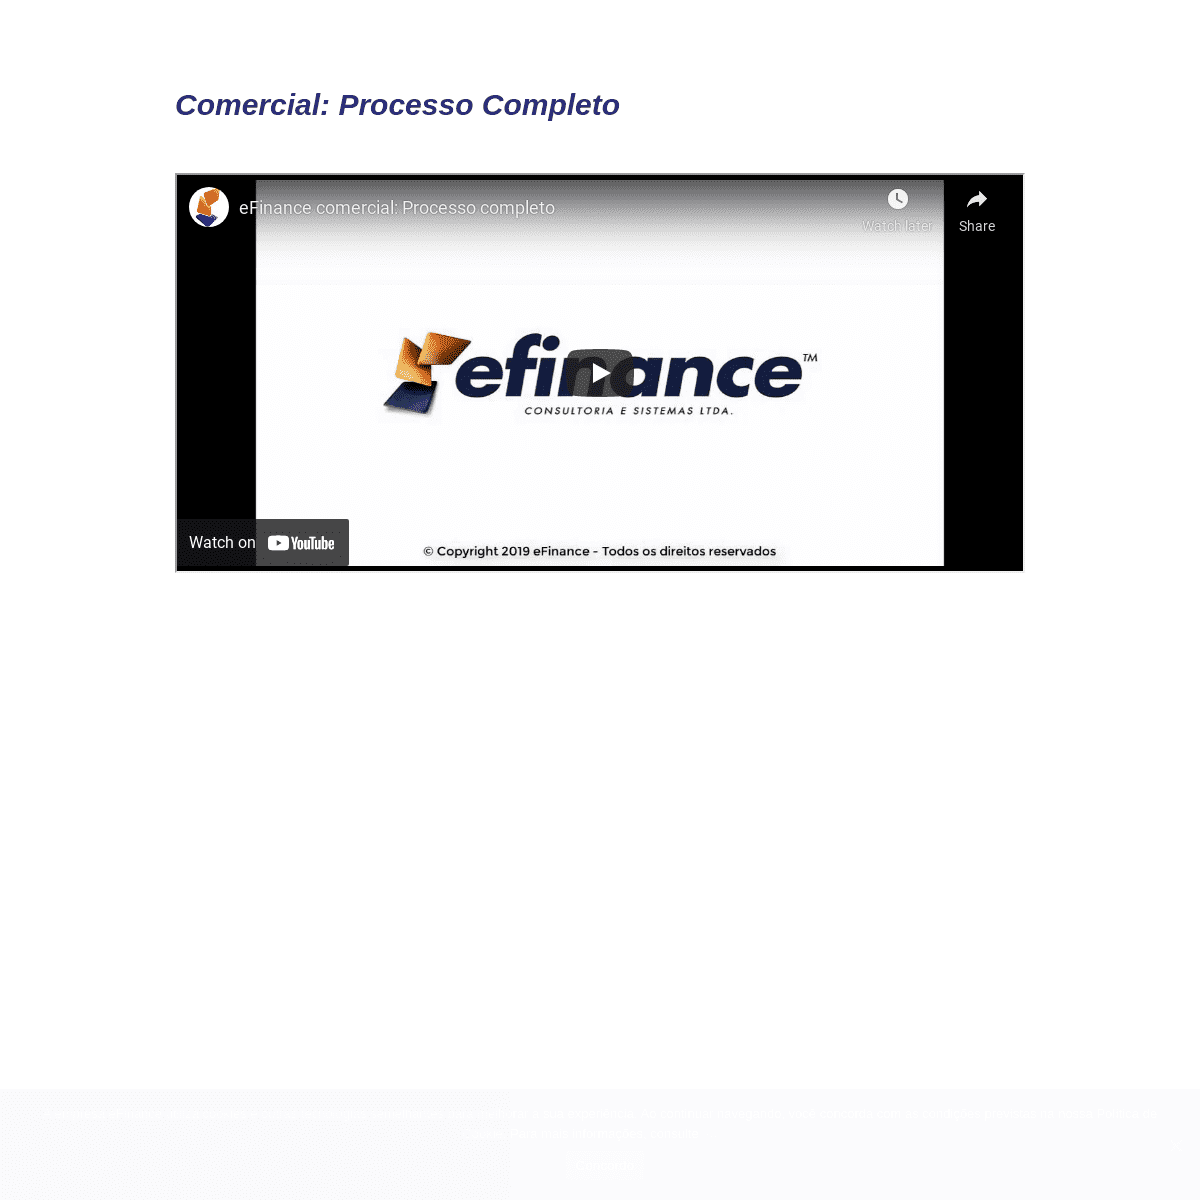 A complete backup of https://www.efinance.com.br/module/comercial-processo-completo/